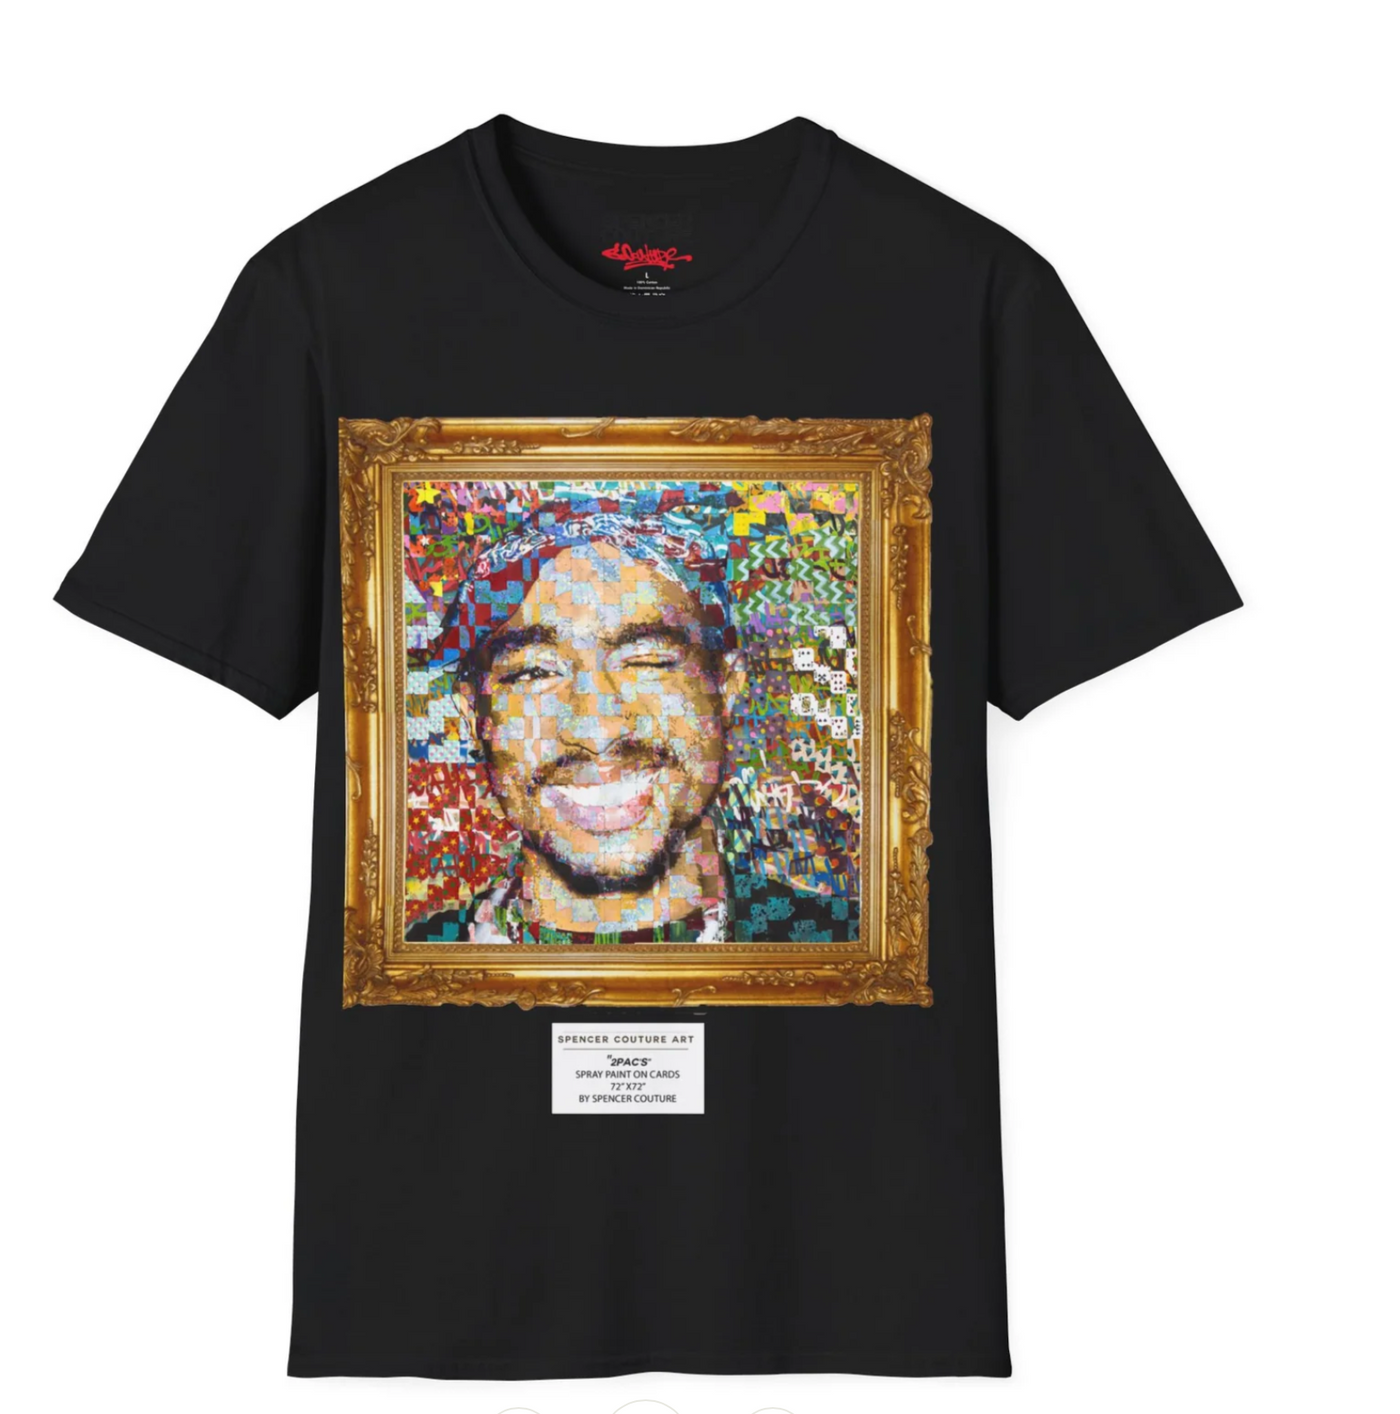 Cotton T-shirt with Spencer Couture's vivid art on the back. Features detailed print of original artwork, bringing wearable art to life. Includes an artistic label. Comfortable, classic fit